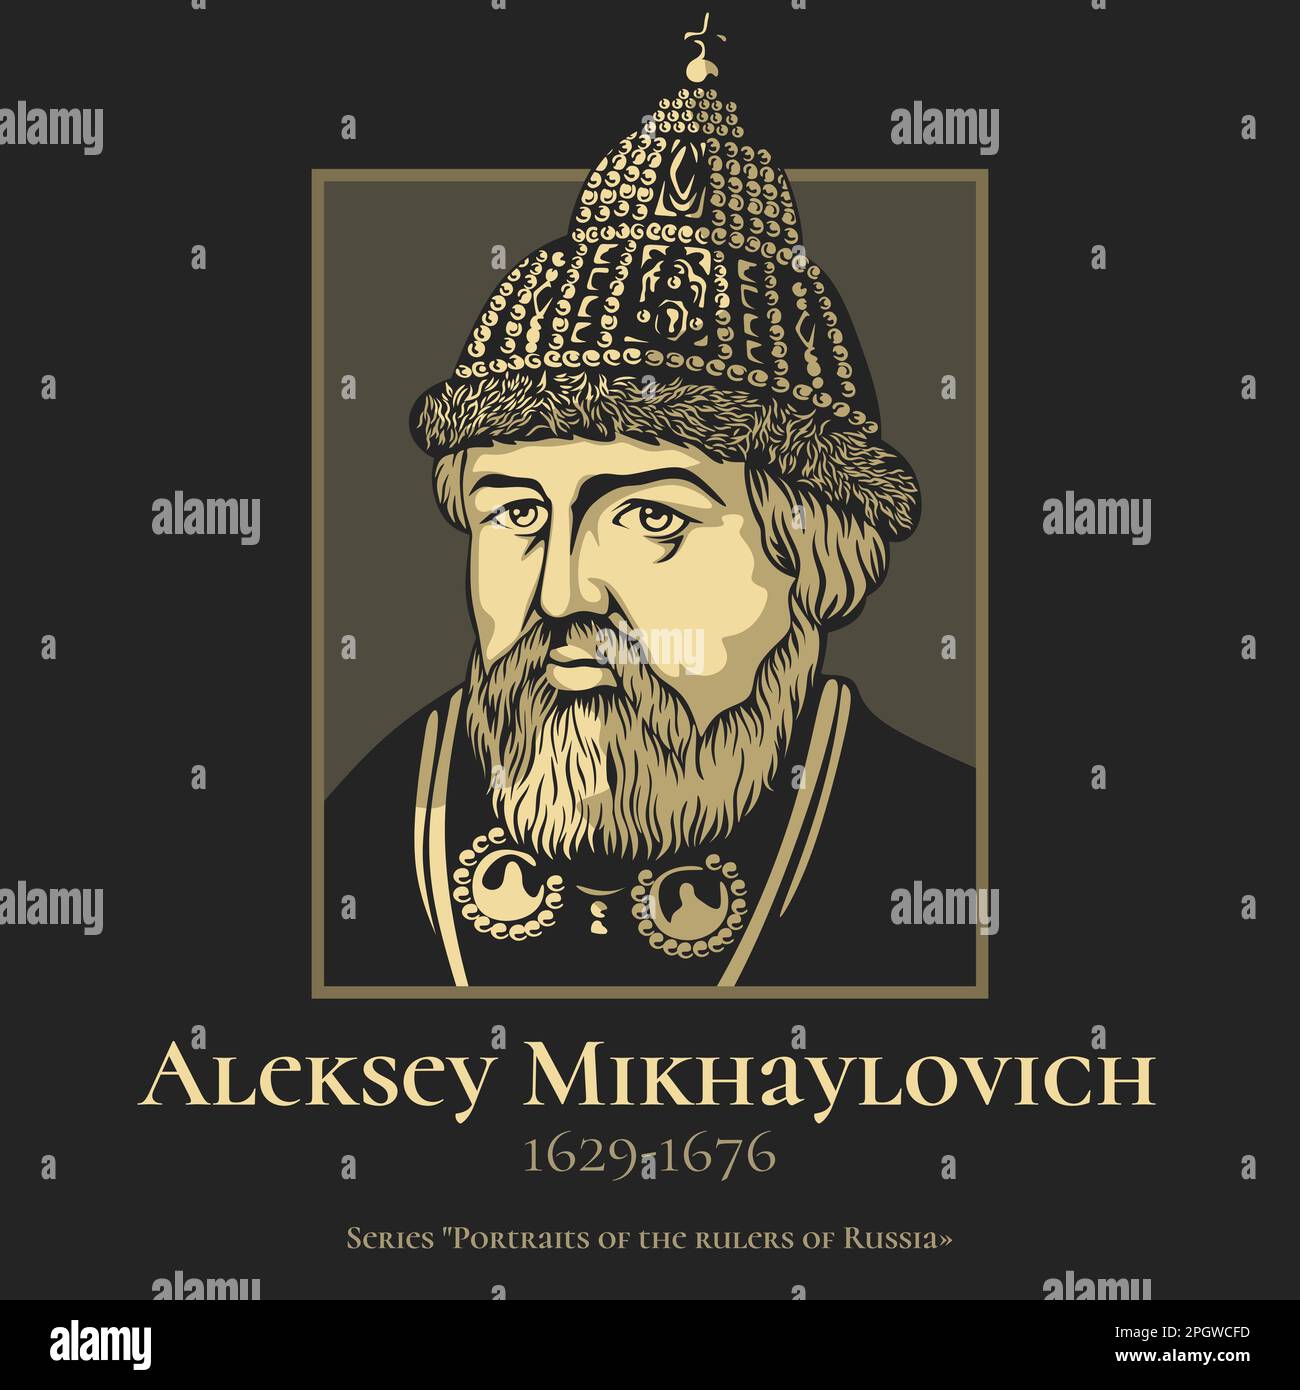 Aleksey Mikhaylovich (1629-1676) was the Tsar of Russia from 1645 until his death in 1676. Stock Vector